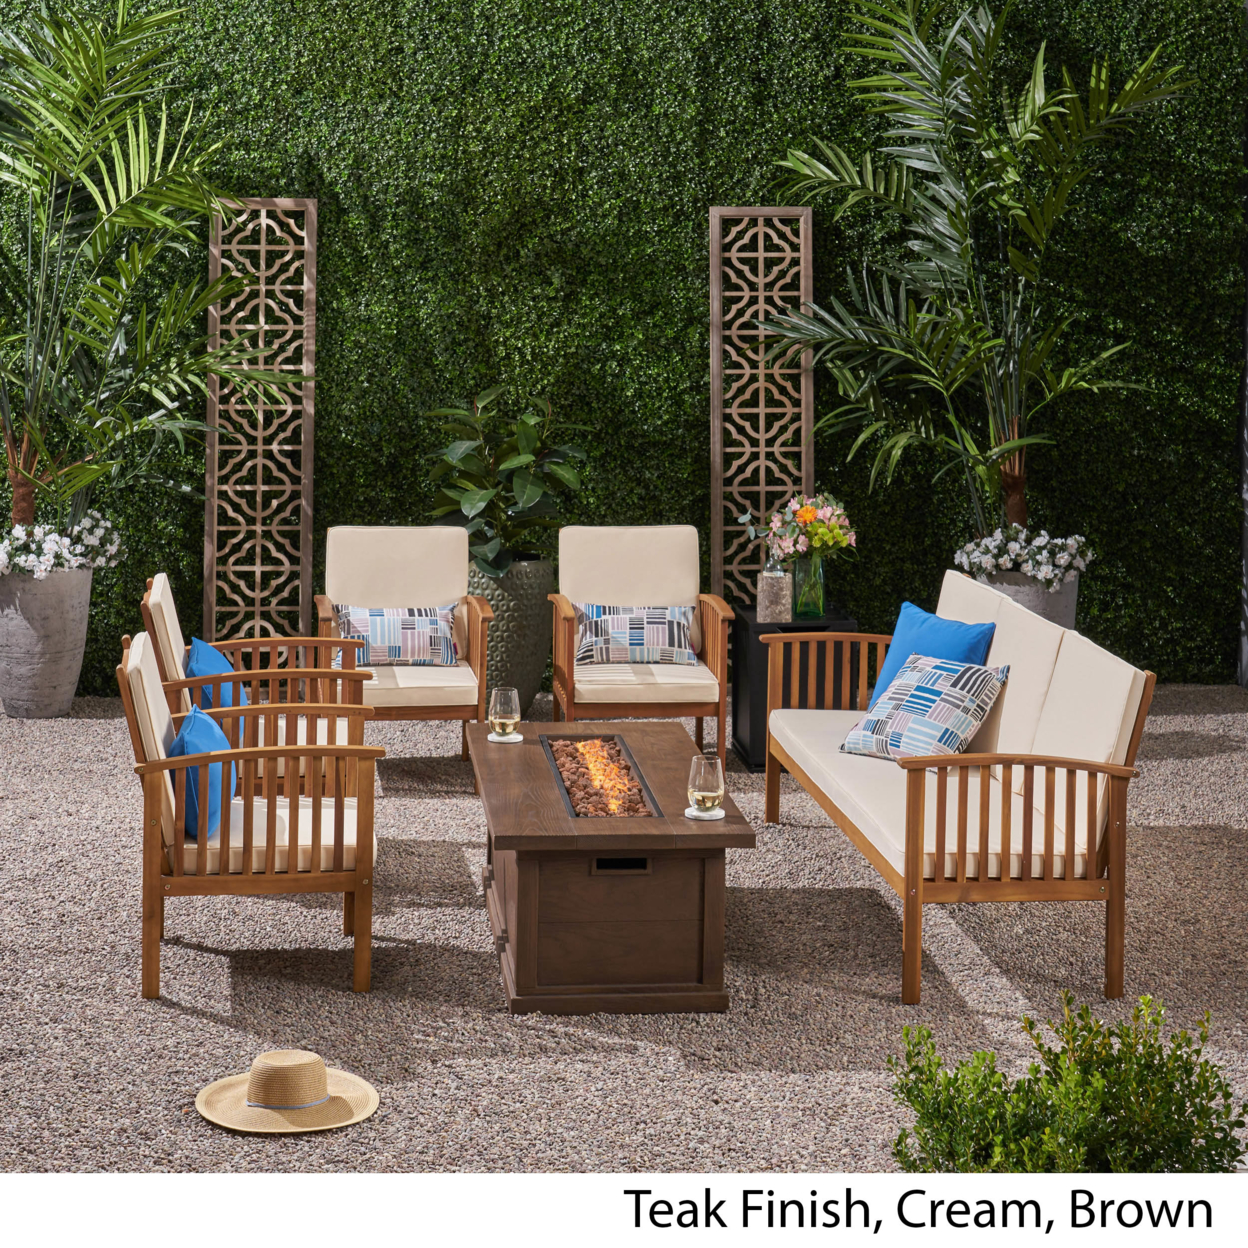 Suzanne Sophia Outdoor 7 Piece Acacia Wood Chat Set With Fire Pit - Gray Finish, Cream, Gray